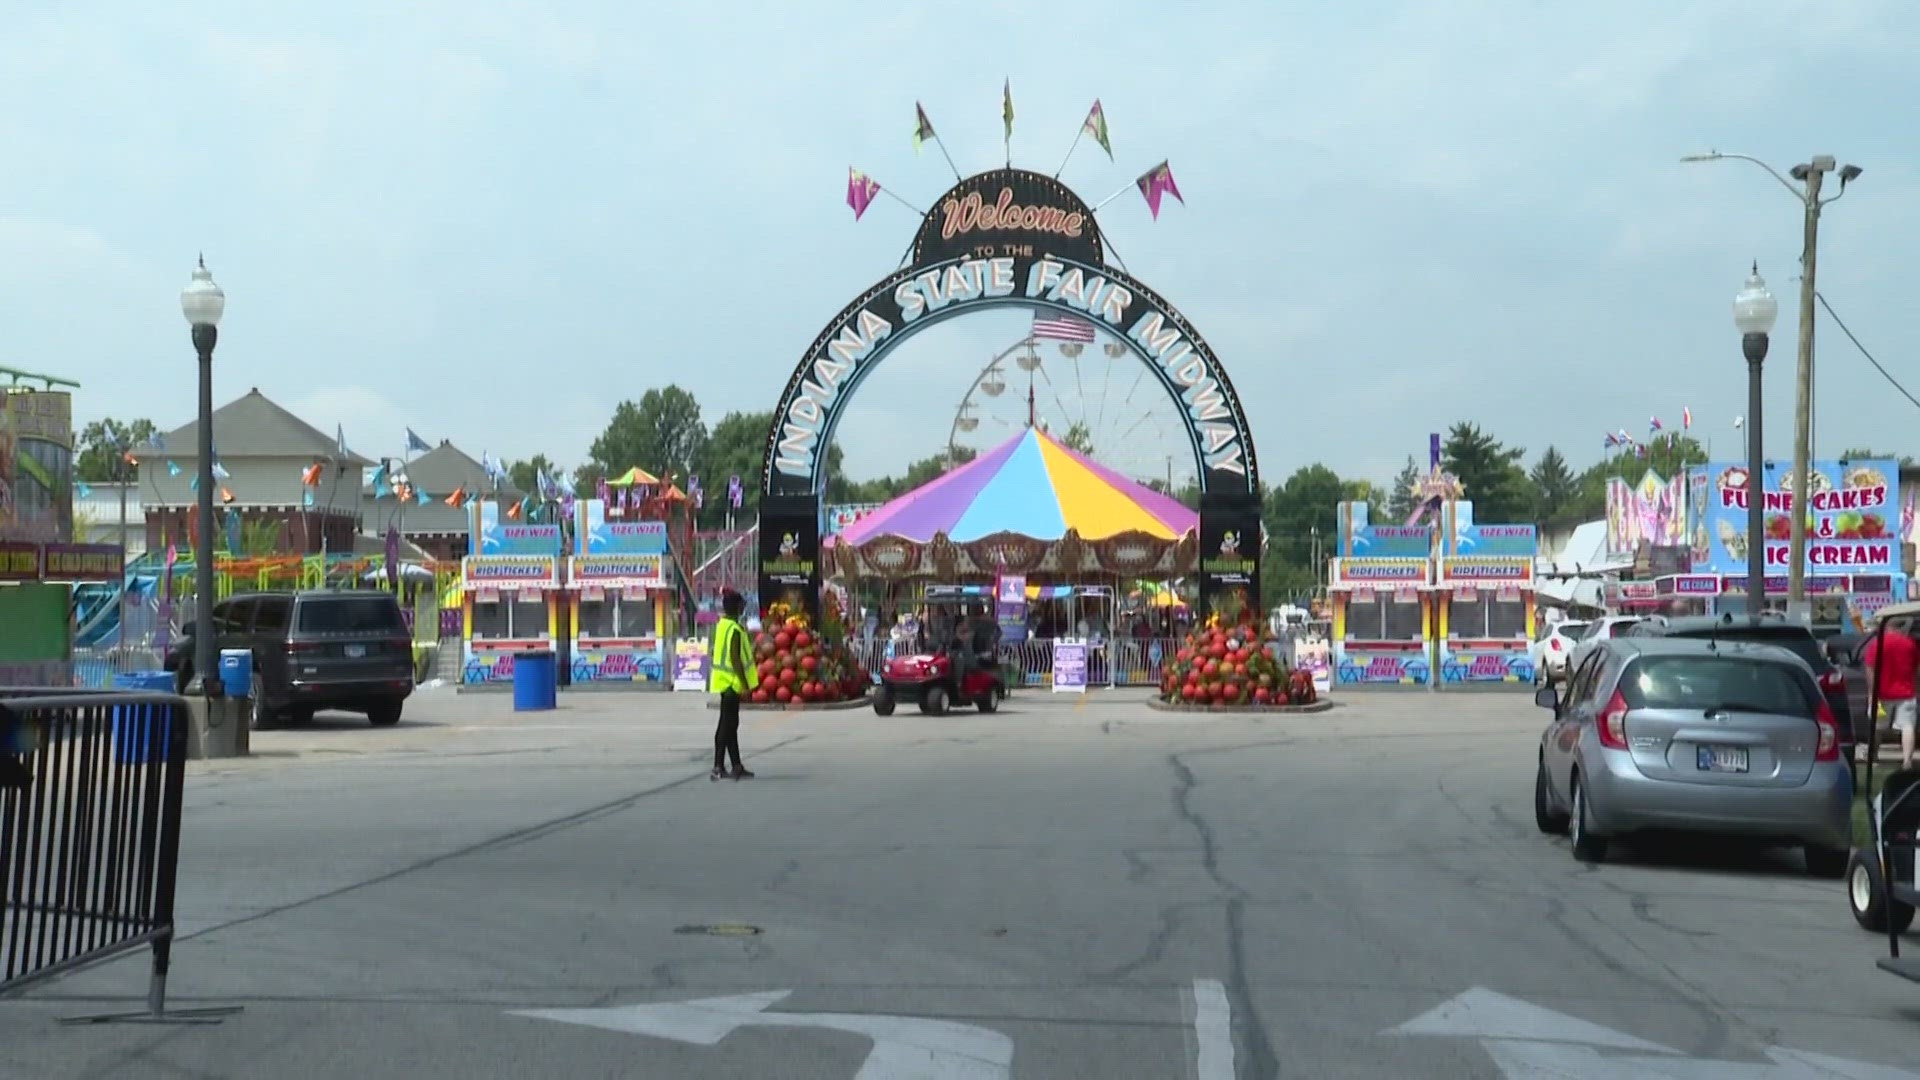 When it comes to the Indiana State Fair we know a lot of people come for the rides but also delicious food and this year there are some changes you'll want to know.